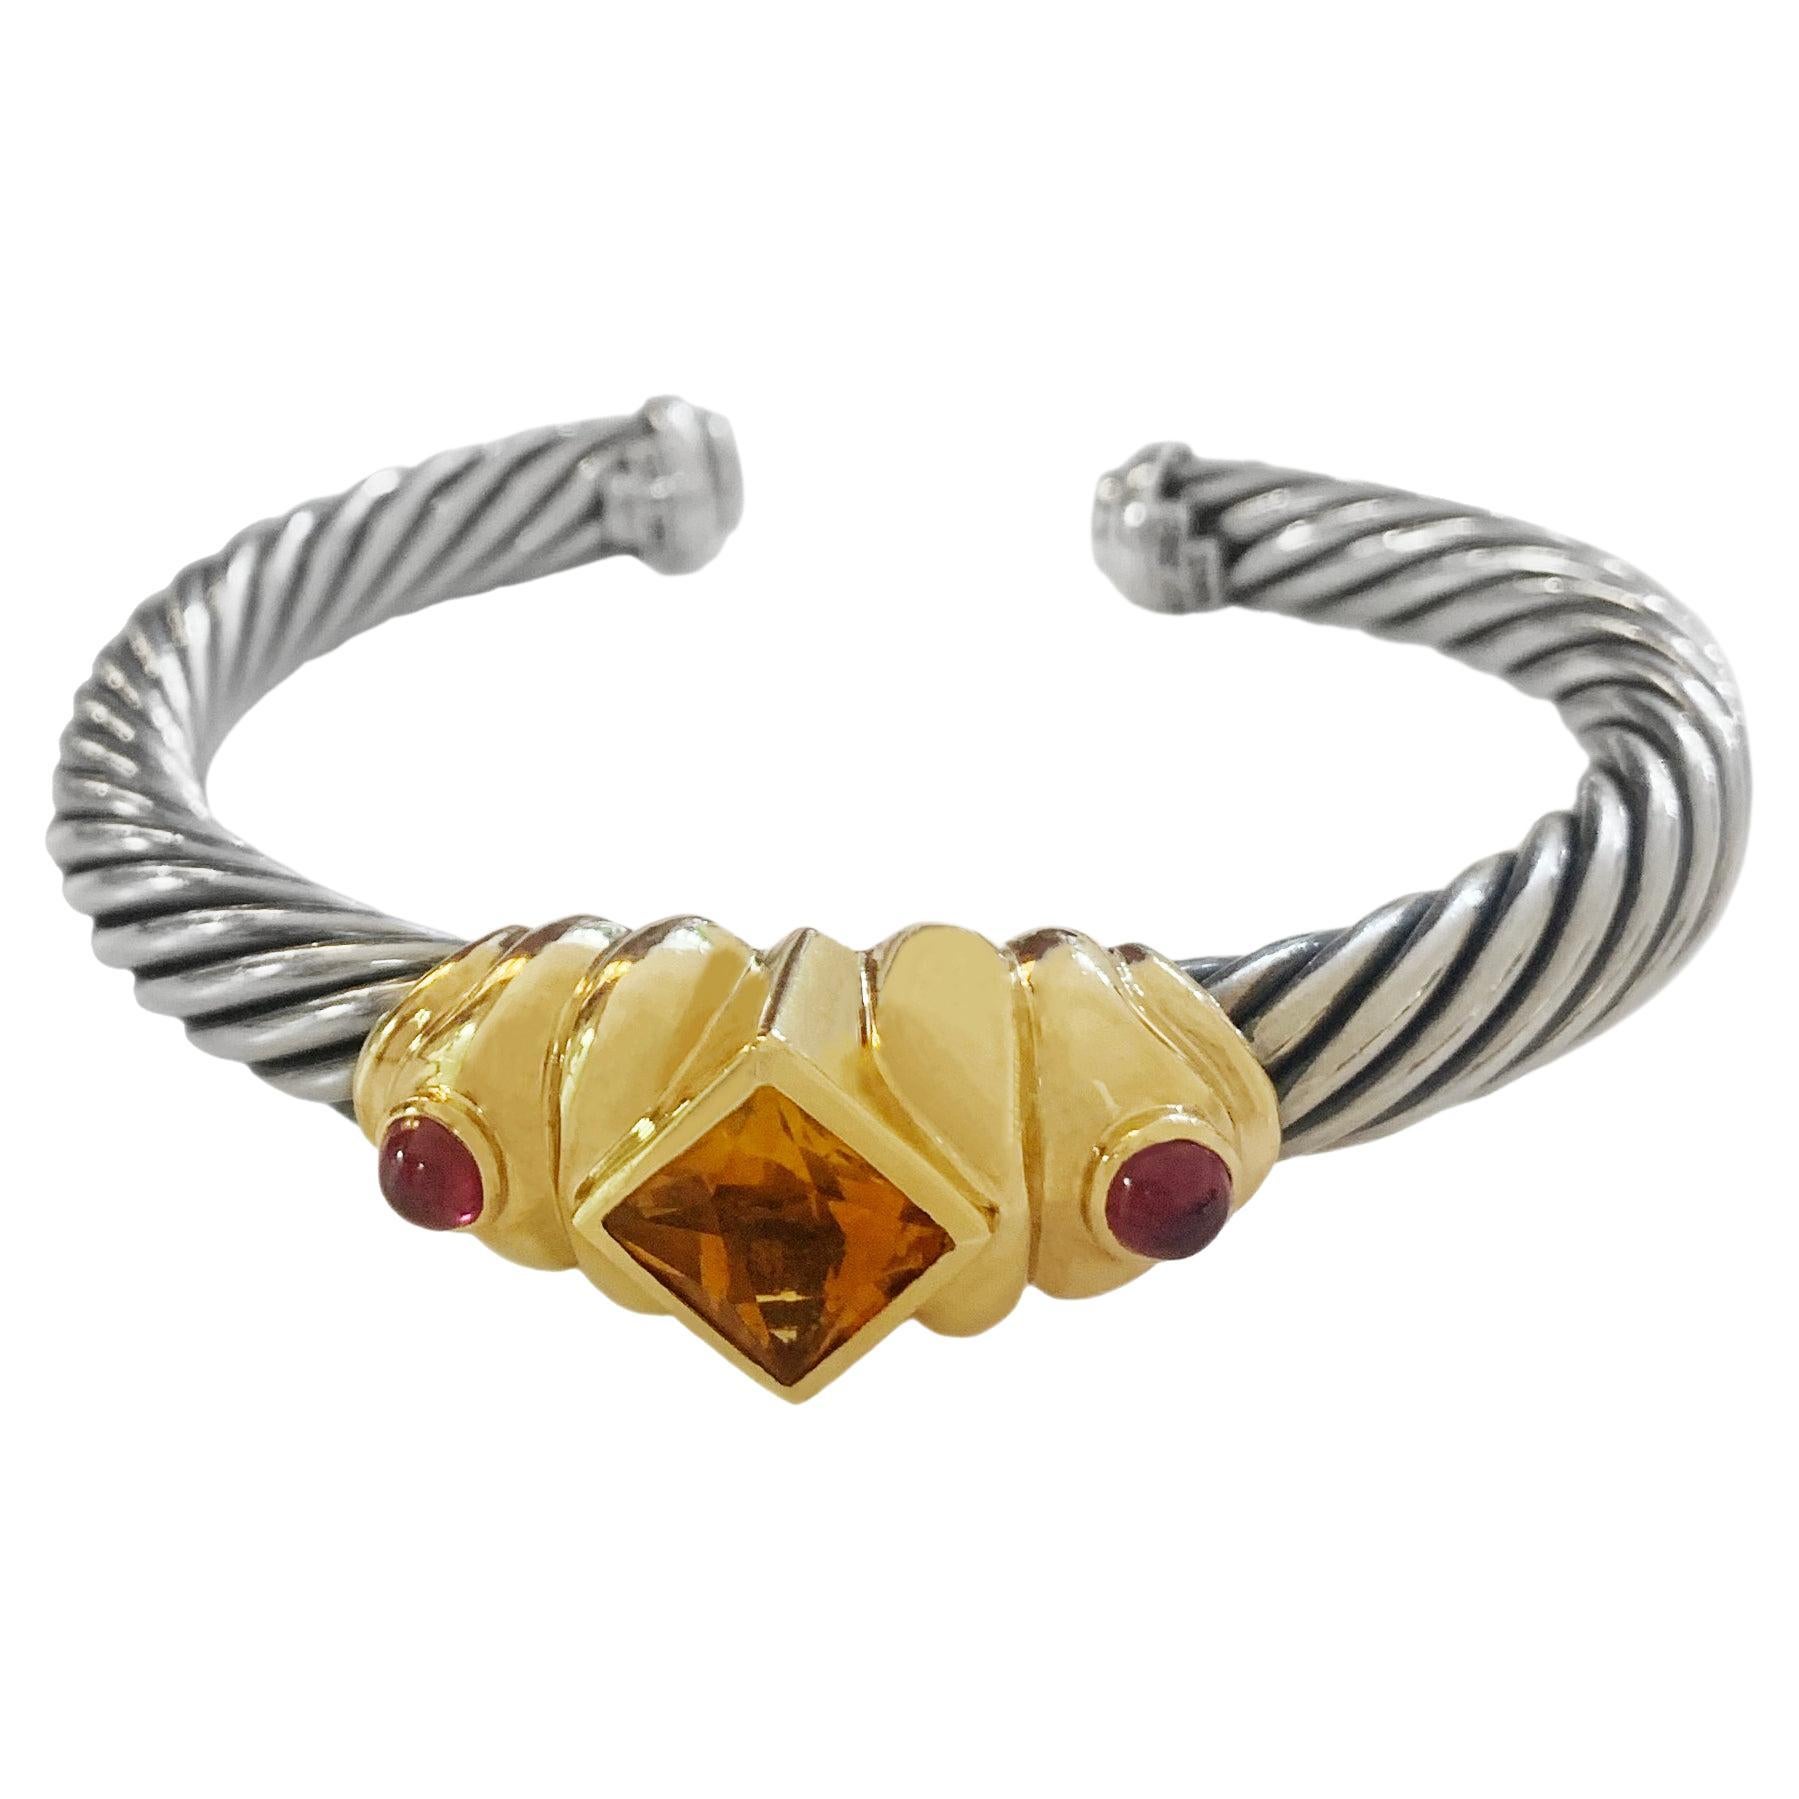 David Yurman 4mm Cable Bracelet With Citrine | Rent David Yurman jewelry  for $55/month - Join Switch